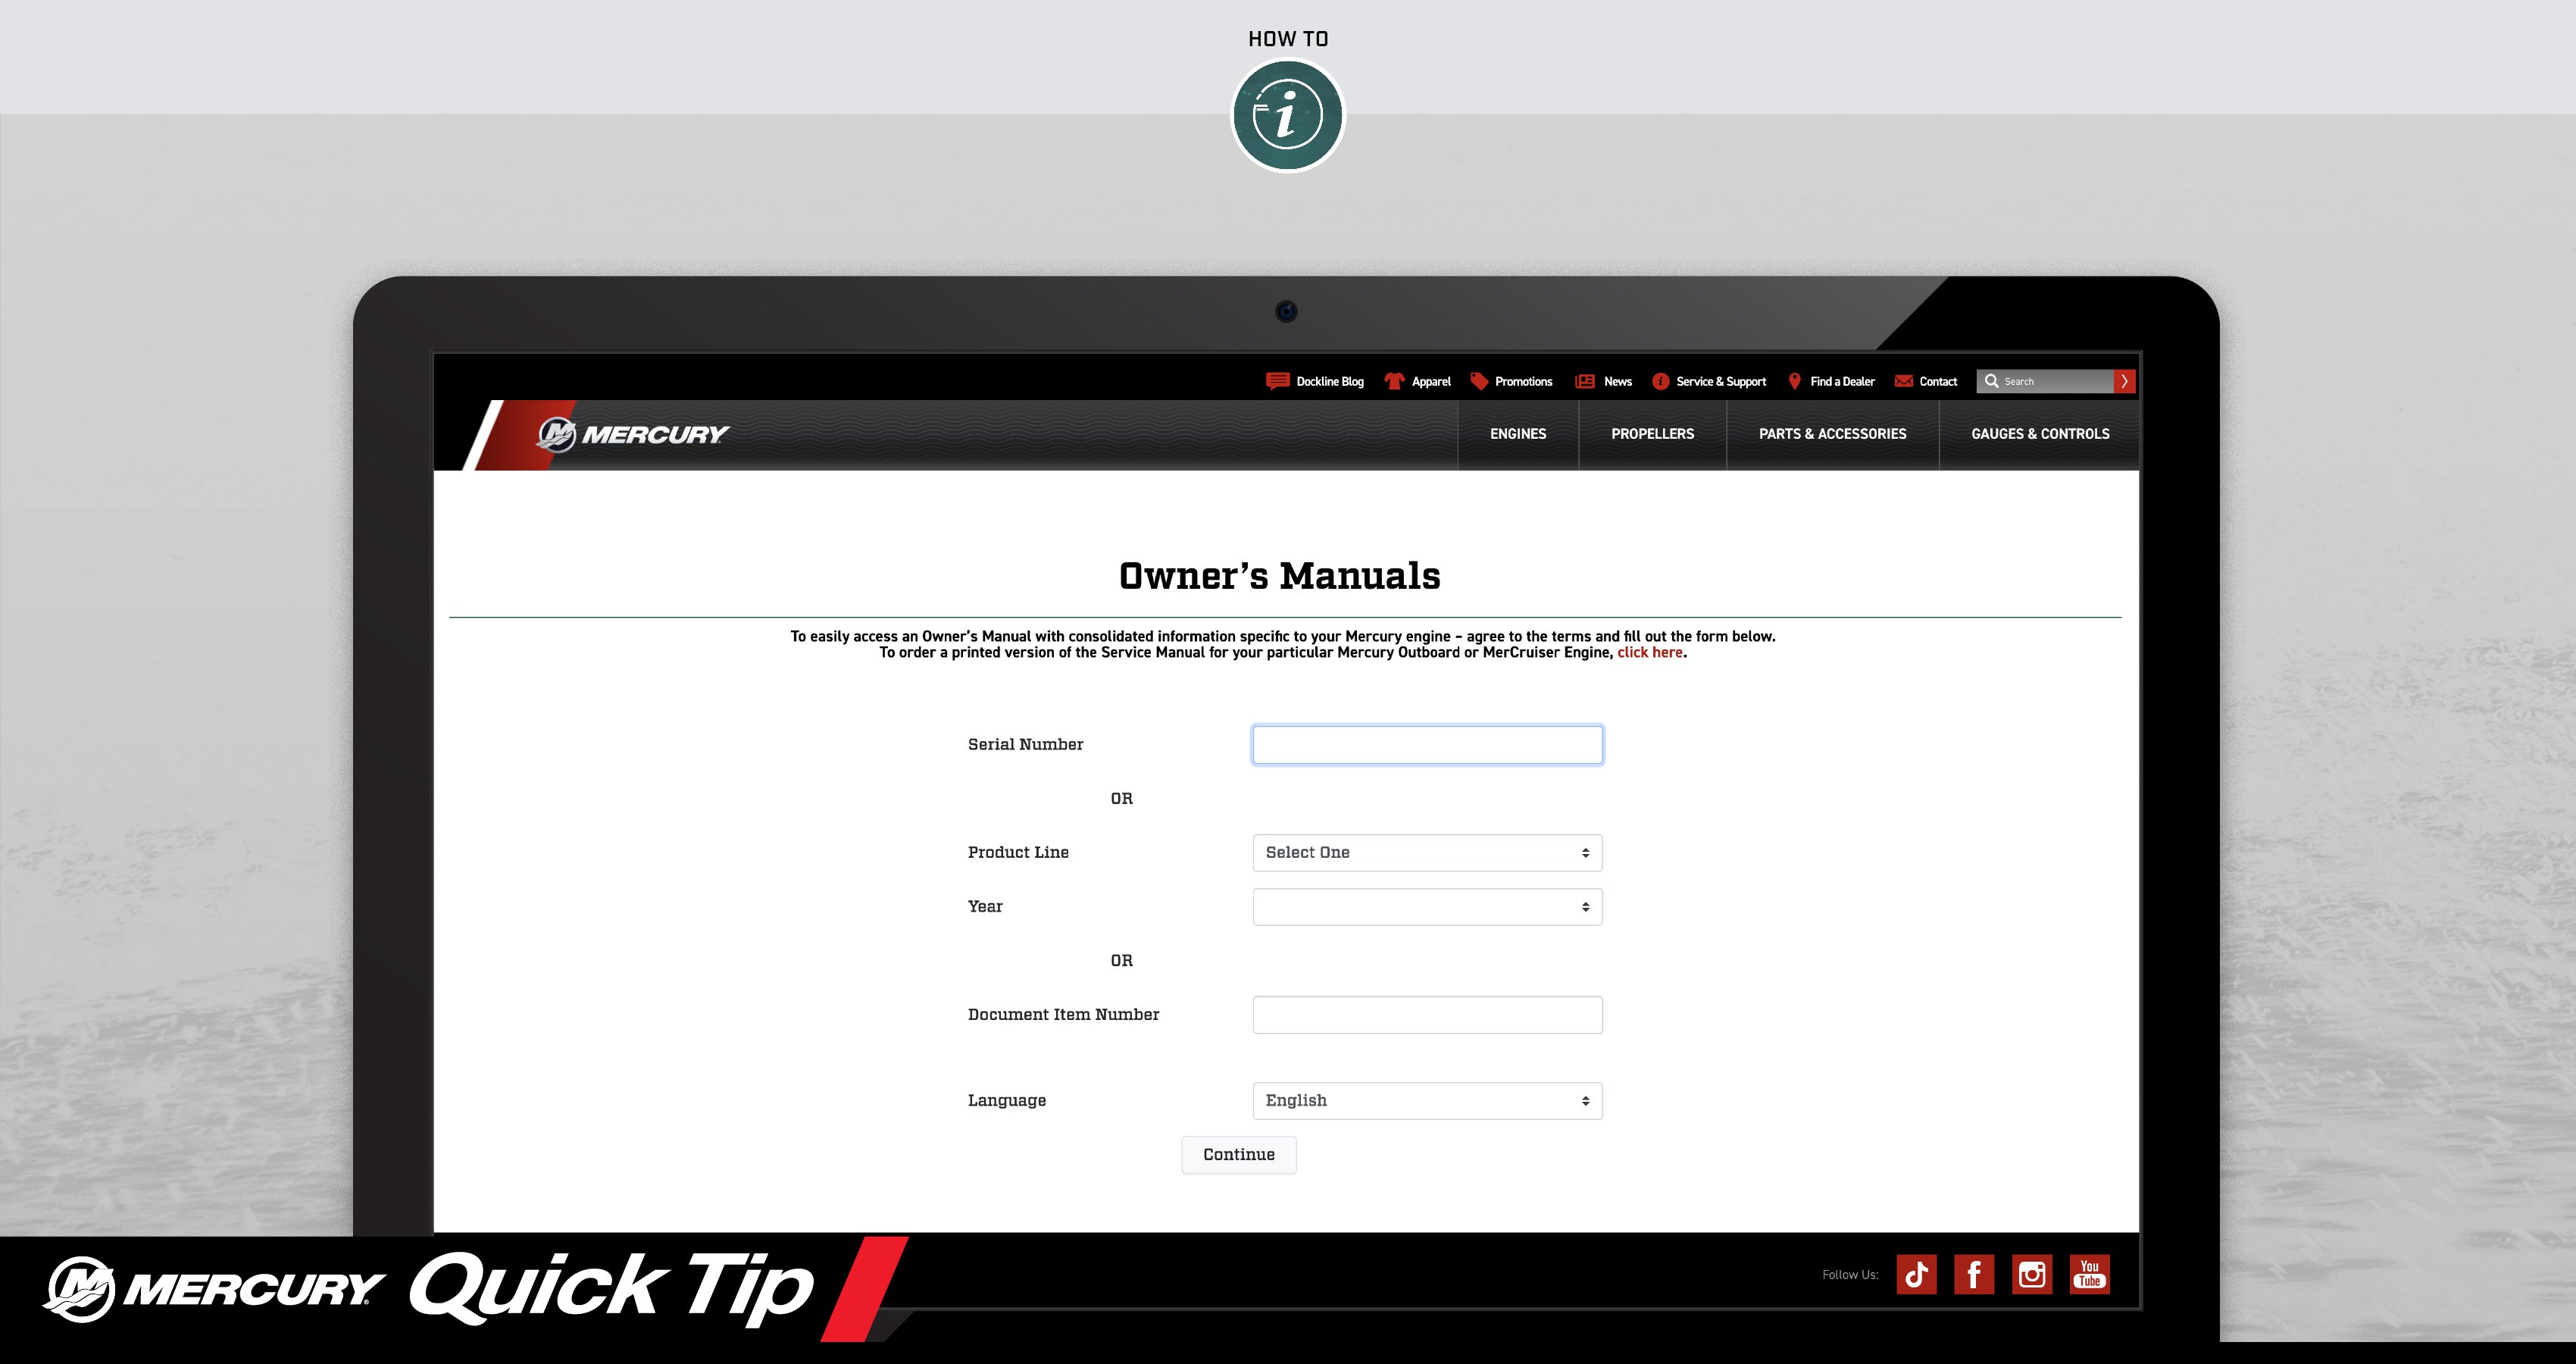 Quick Tip: How to Get a Digital Copy of Your Mercury Owner’s Manual